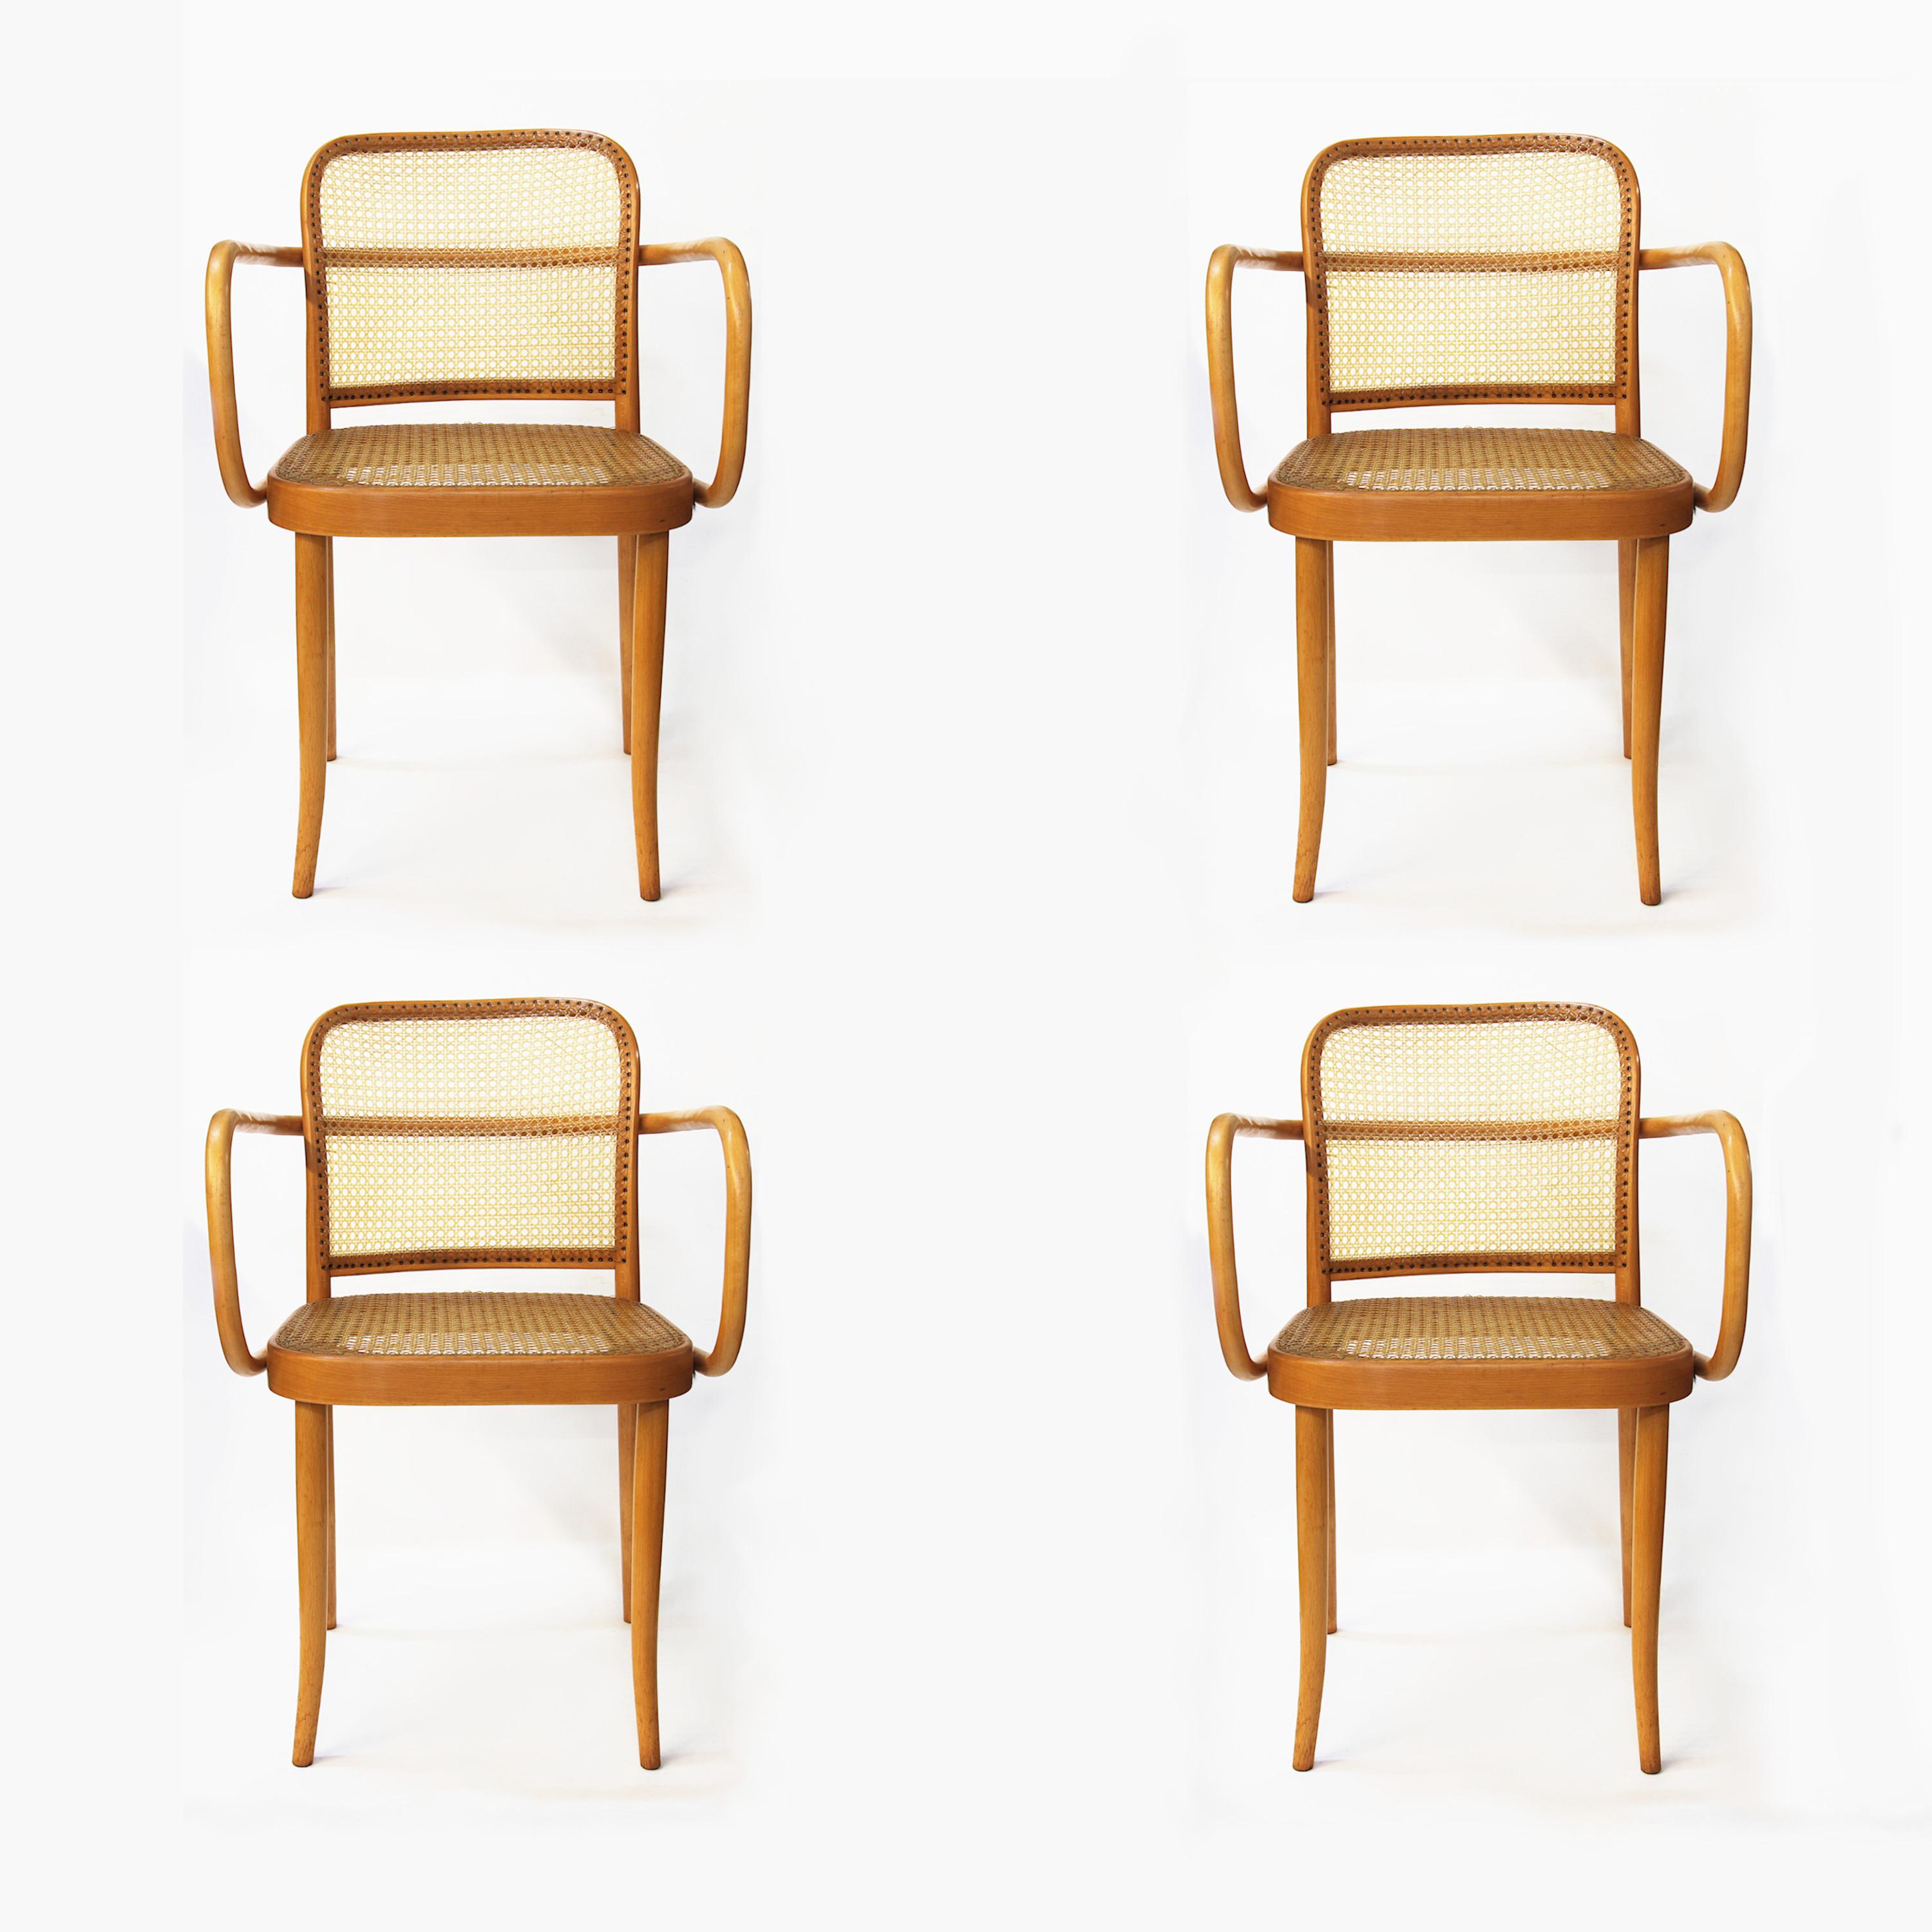 Wonderful set of four dining chairs designed by Josef Frank and Josef Hoffmann for Stendig. Chairs feature swooping, bentwood birch frames, handwoven cane seats/backs, and that iconic Bauhaus, 